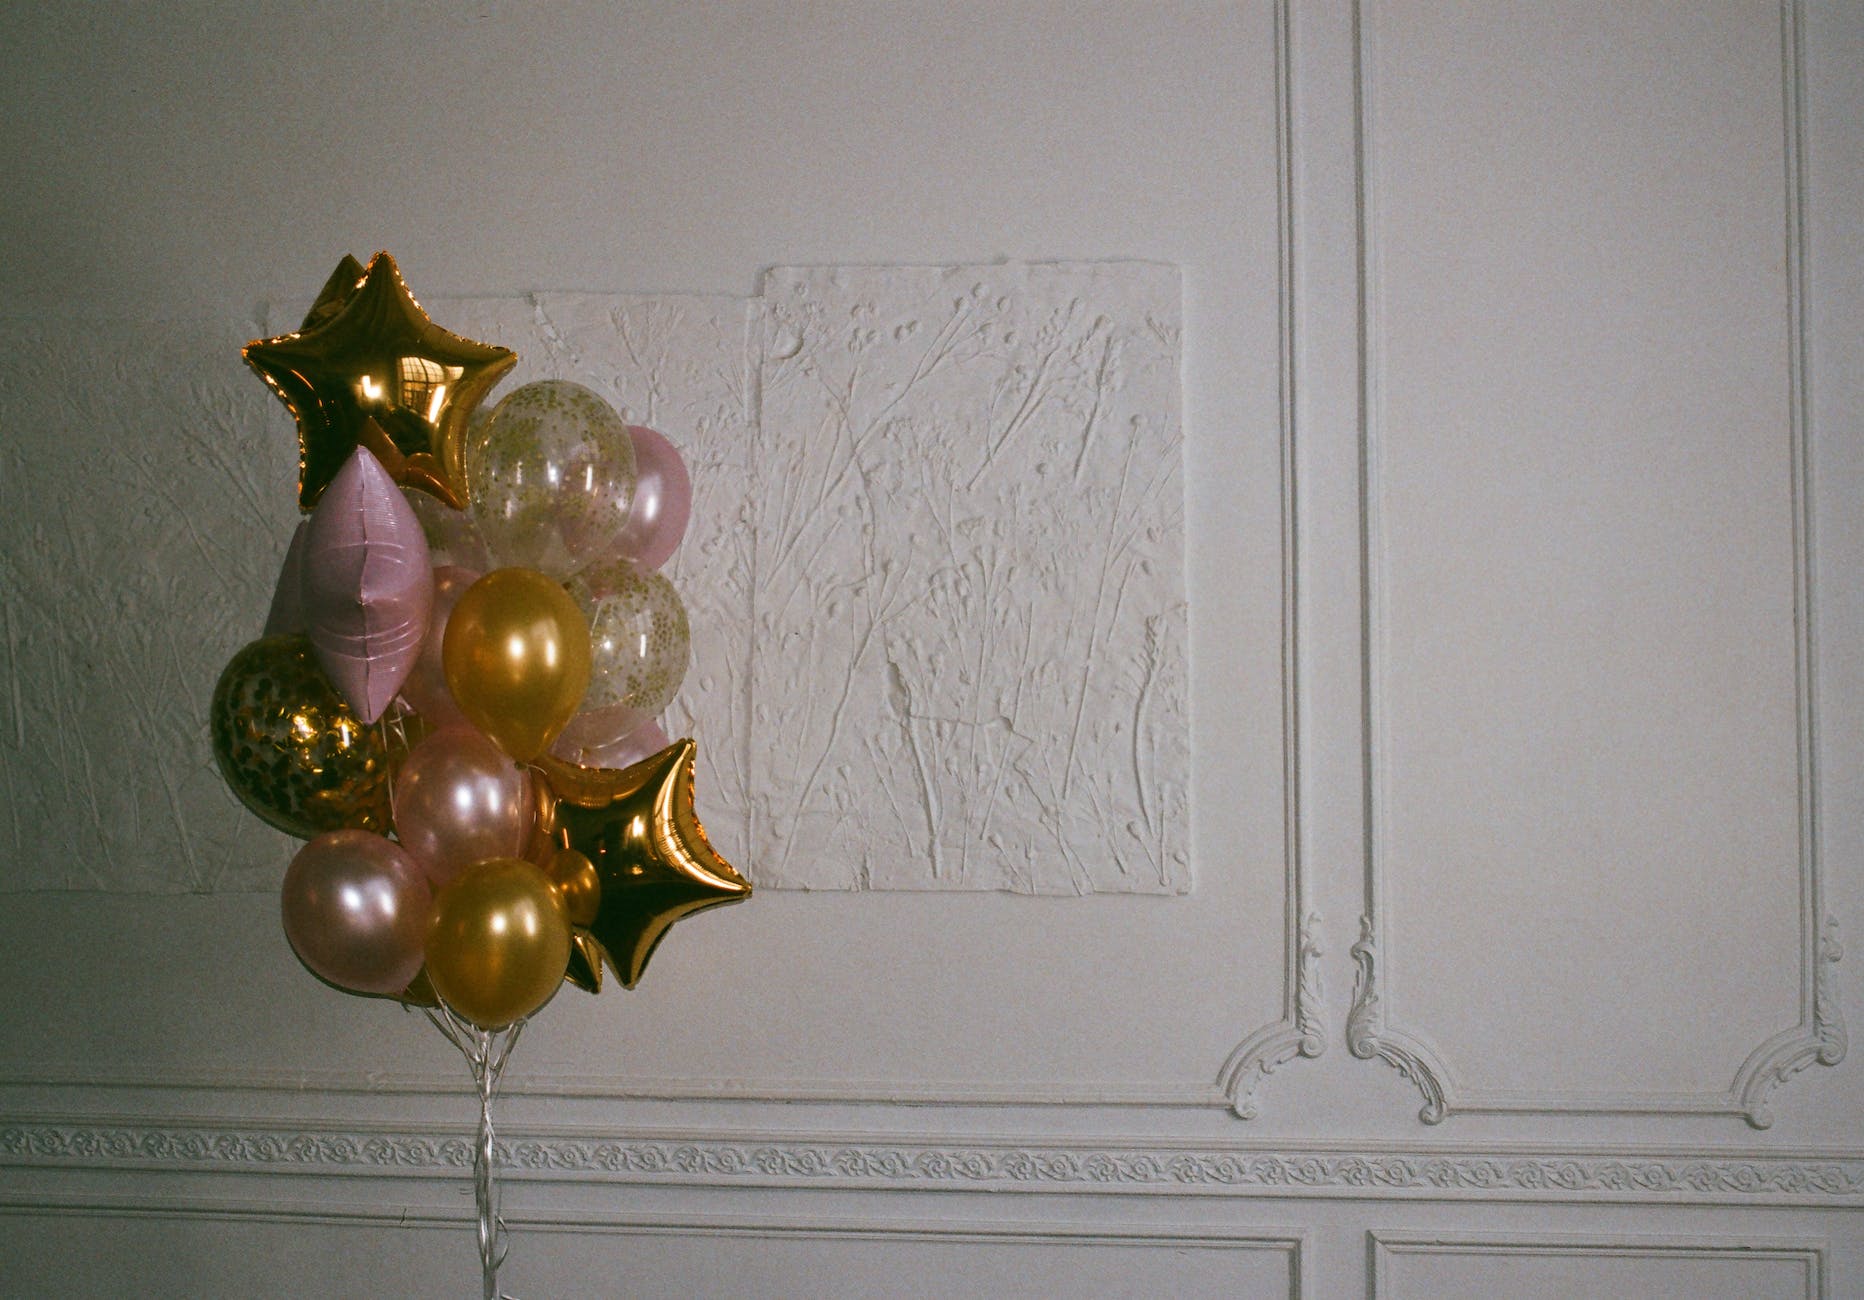 yellow white and pink balloons, balloons in a room, 30th birthday, turning 30, birthday ideas, 30th birthday ideas